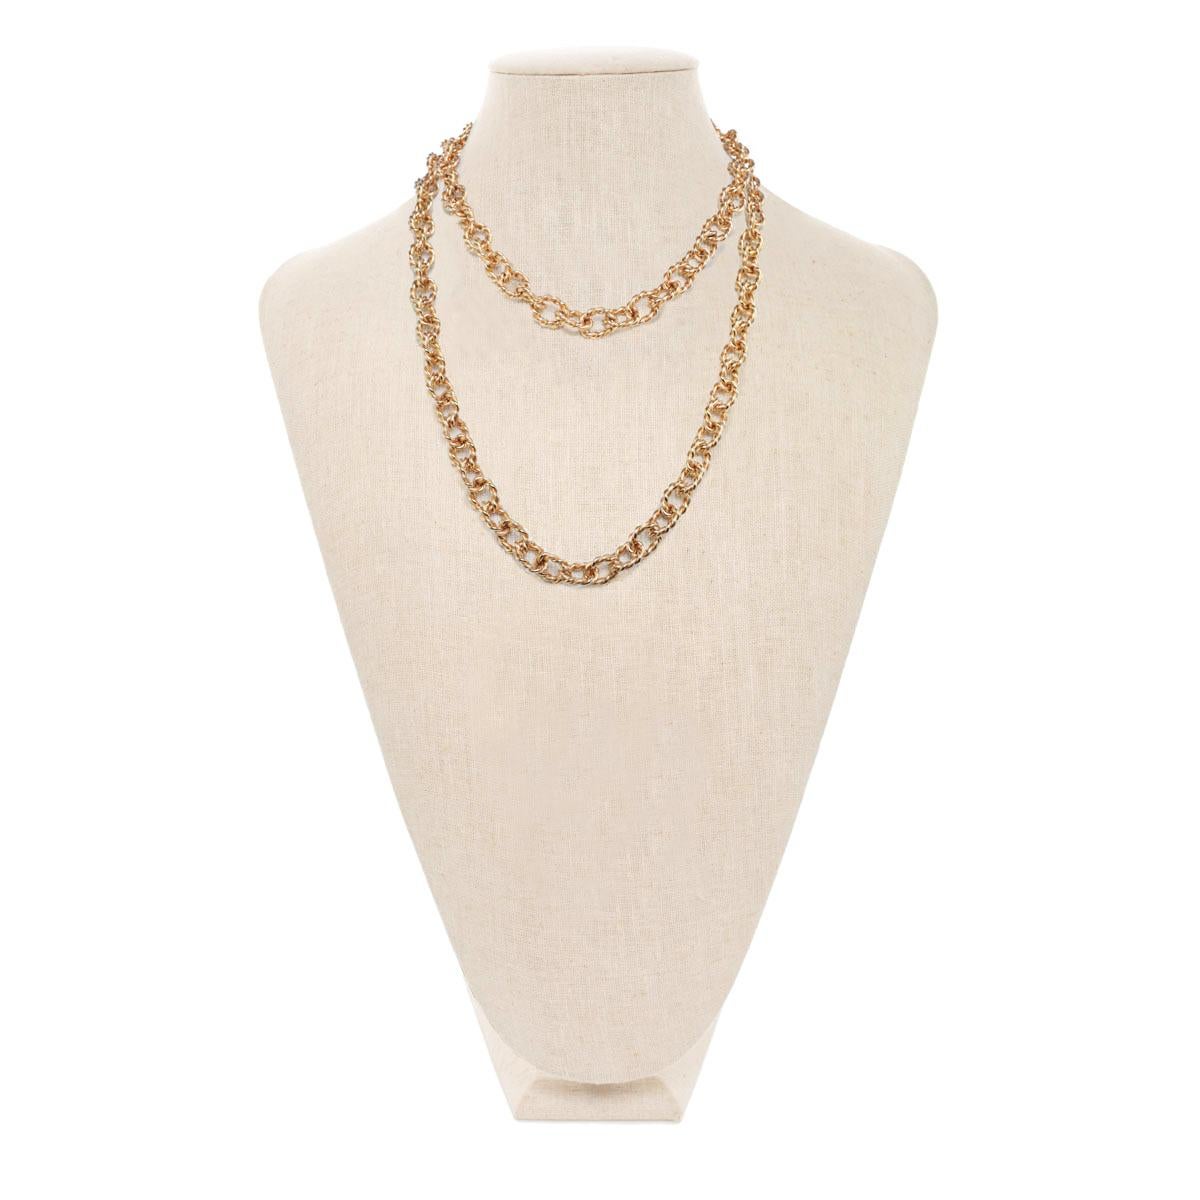 Carolyne Roehm x CINER Gold Mix Textured Round Chain In New Condition For Sale In New York, NY